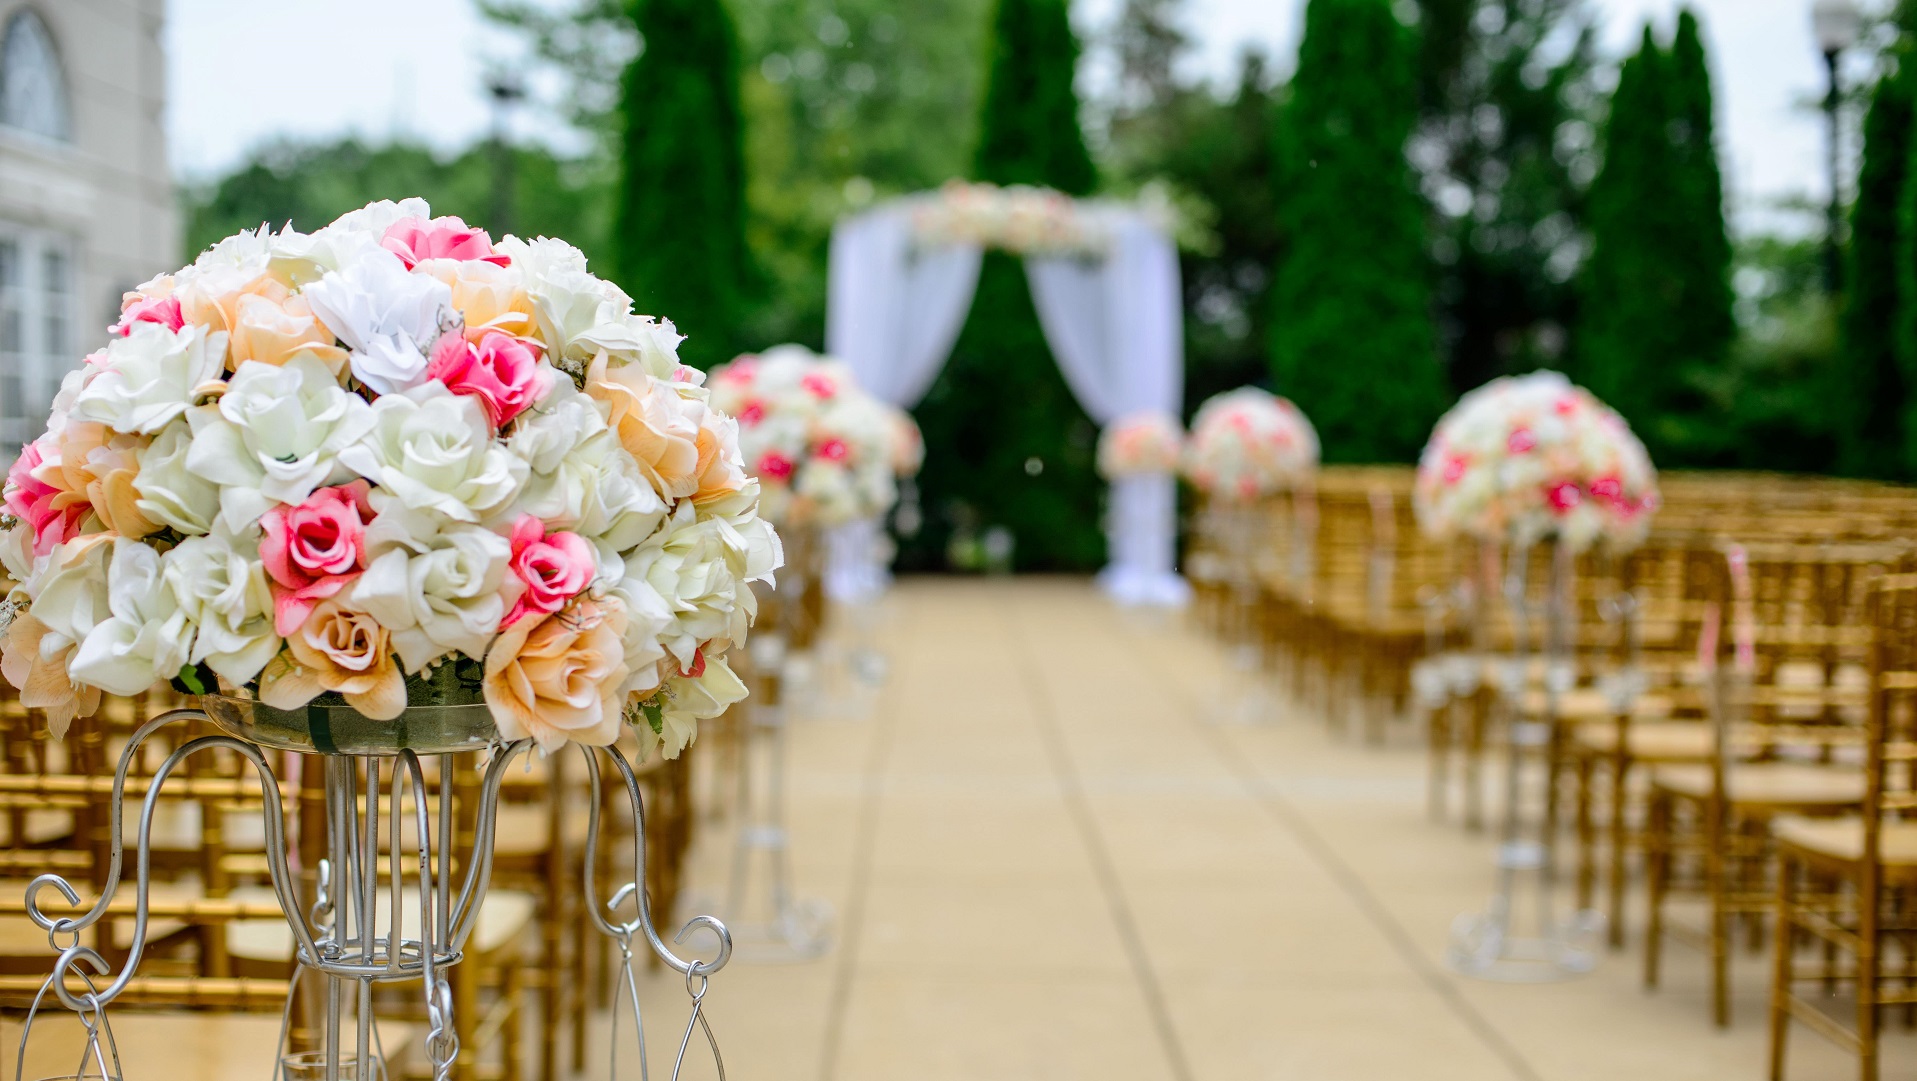 Outdoor wedding with aisle decorated with flowers